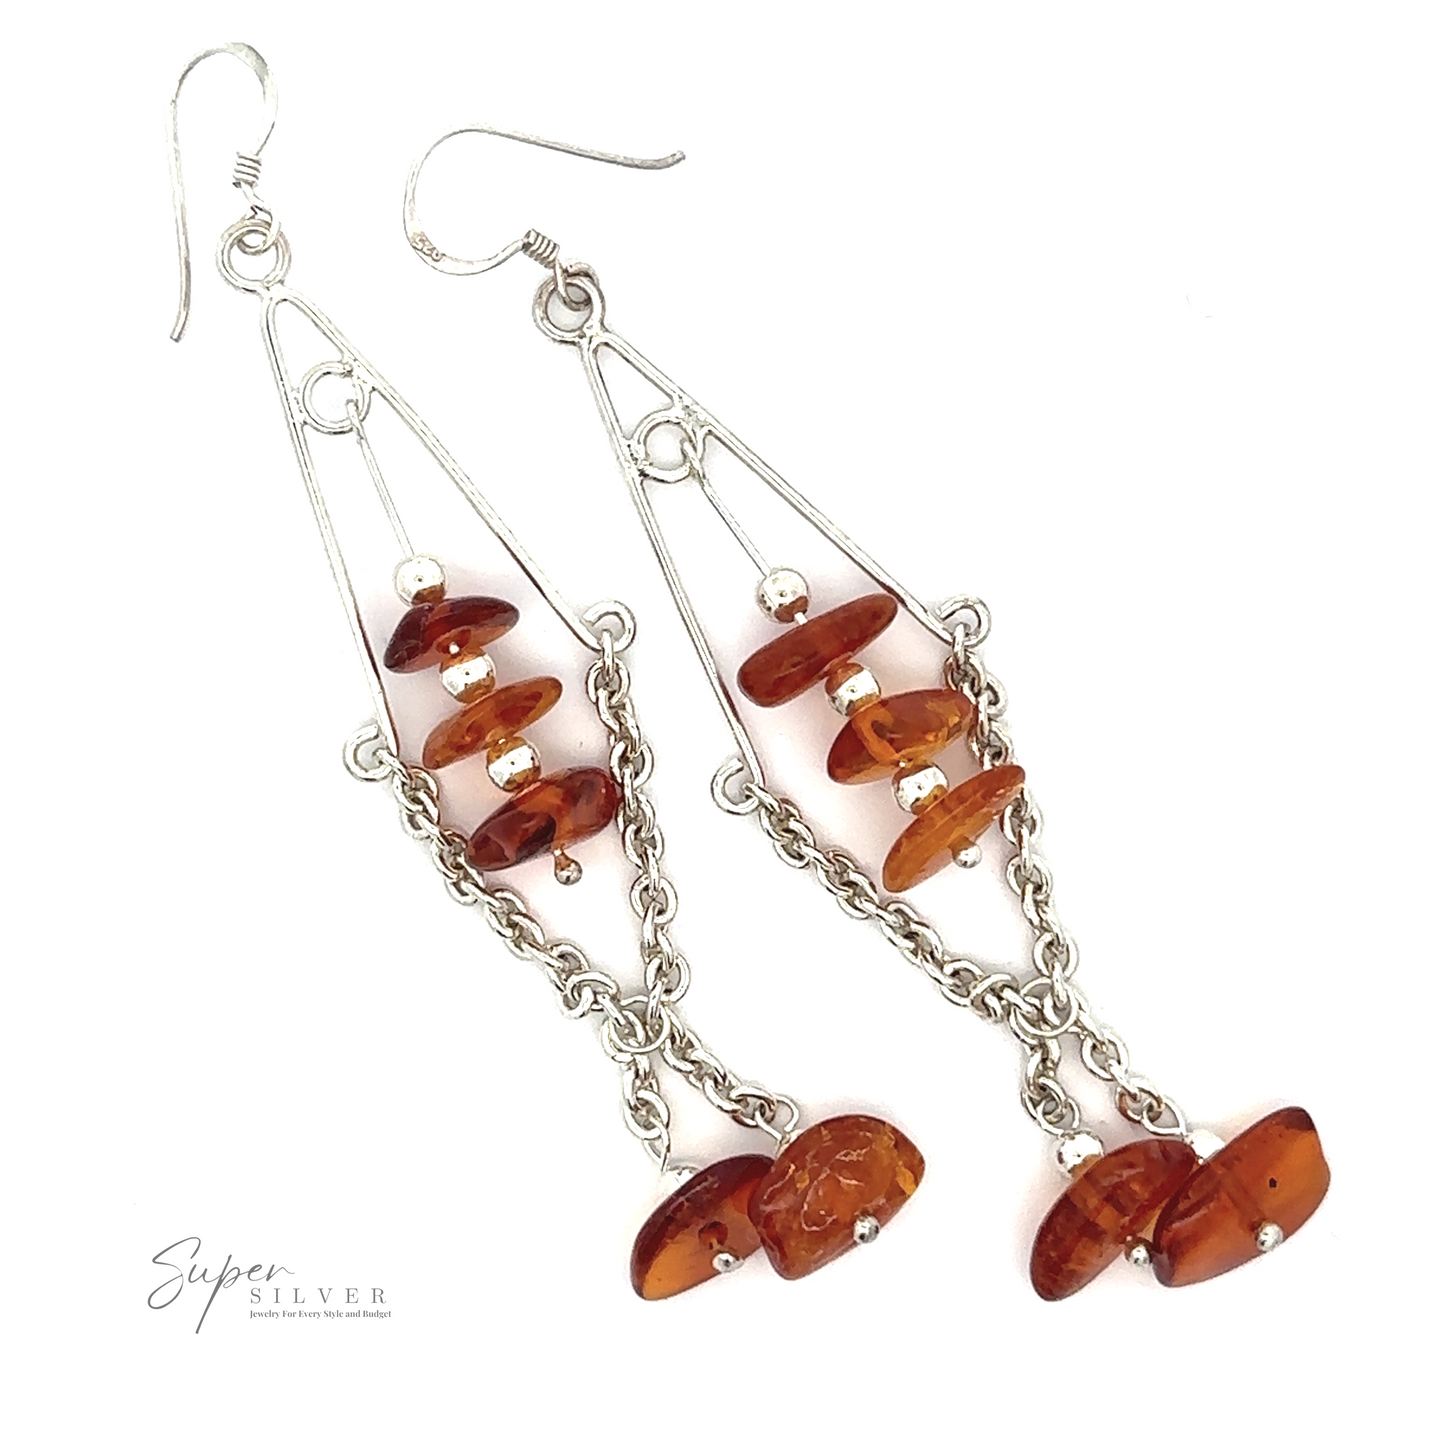 
                  
                    A pair of Beaded Amber Tassel Earrings with dangling orange gemstones and a chain link design exuding festival fashion. The earrings feature a curved wire hook and are displayed on a white background, with the Super Silver logo visible.
                  
                